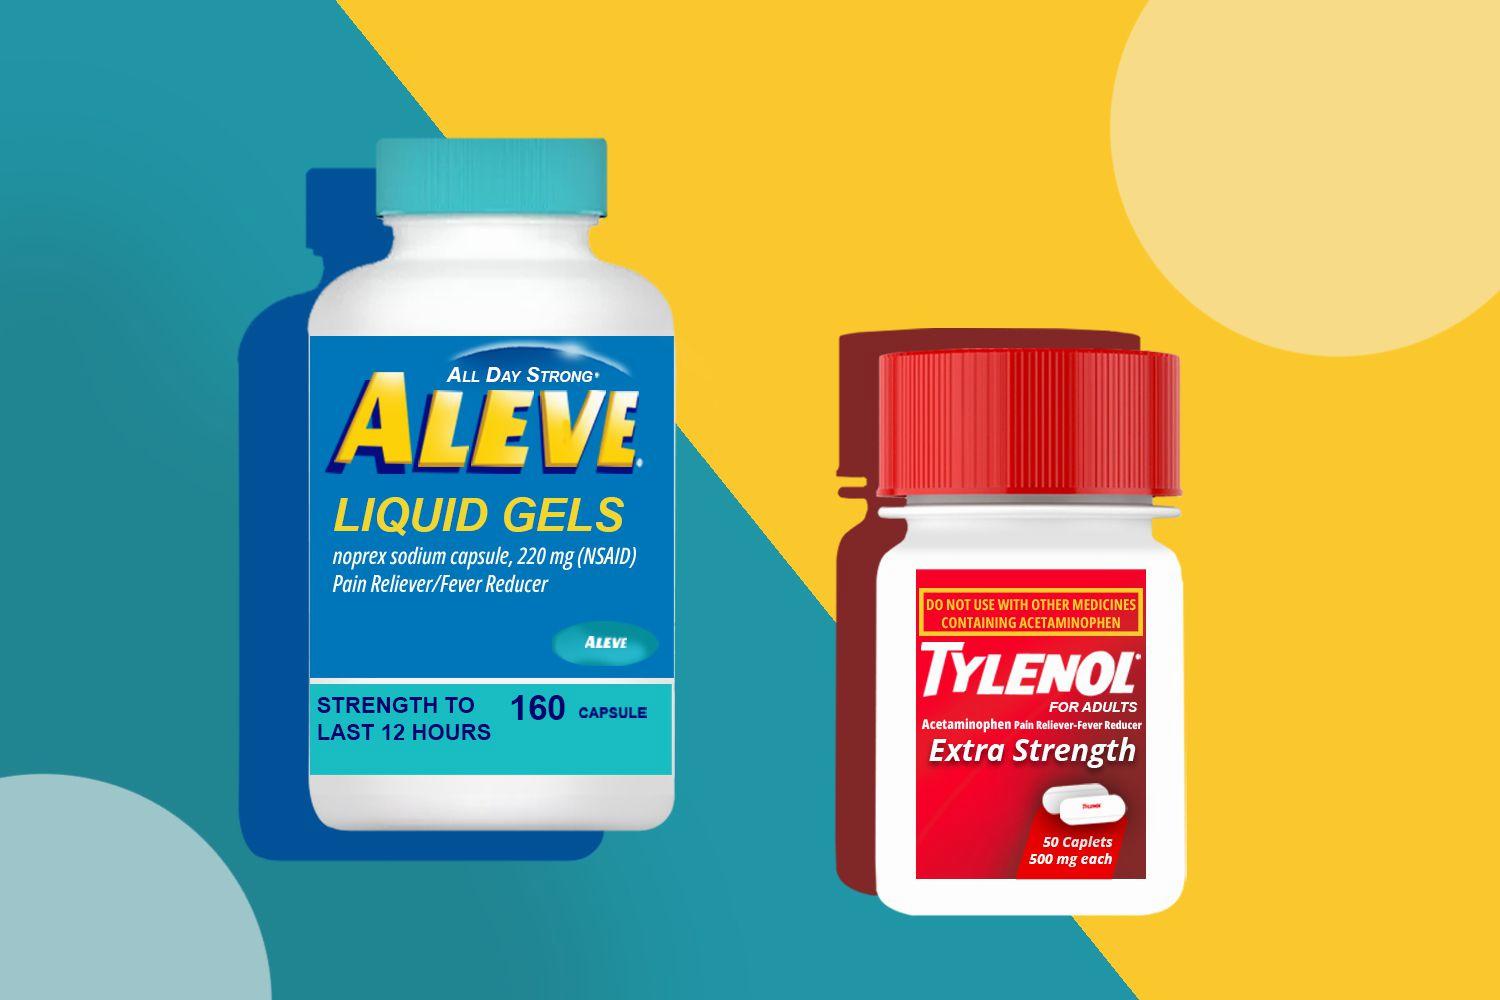 A blue bottle of Aleve Liquid Gels and a red and white bottle of Tylenol Extra Strength caplets.